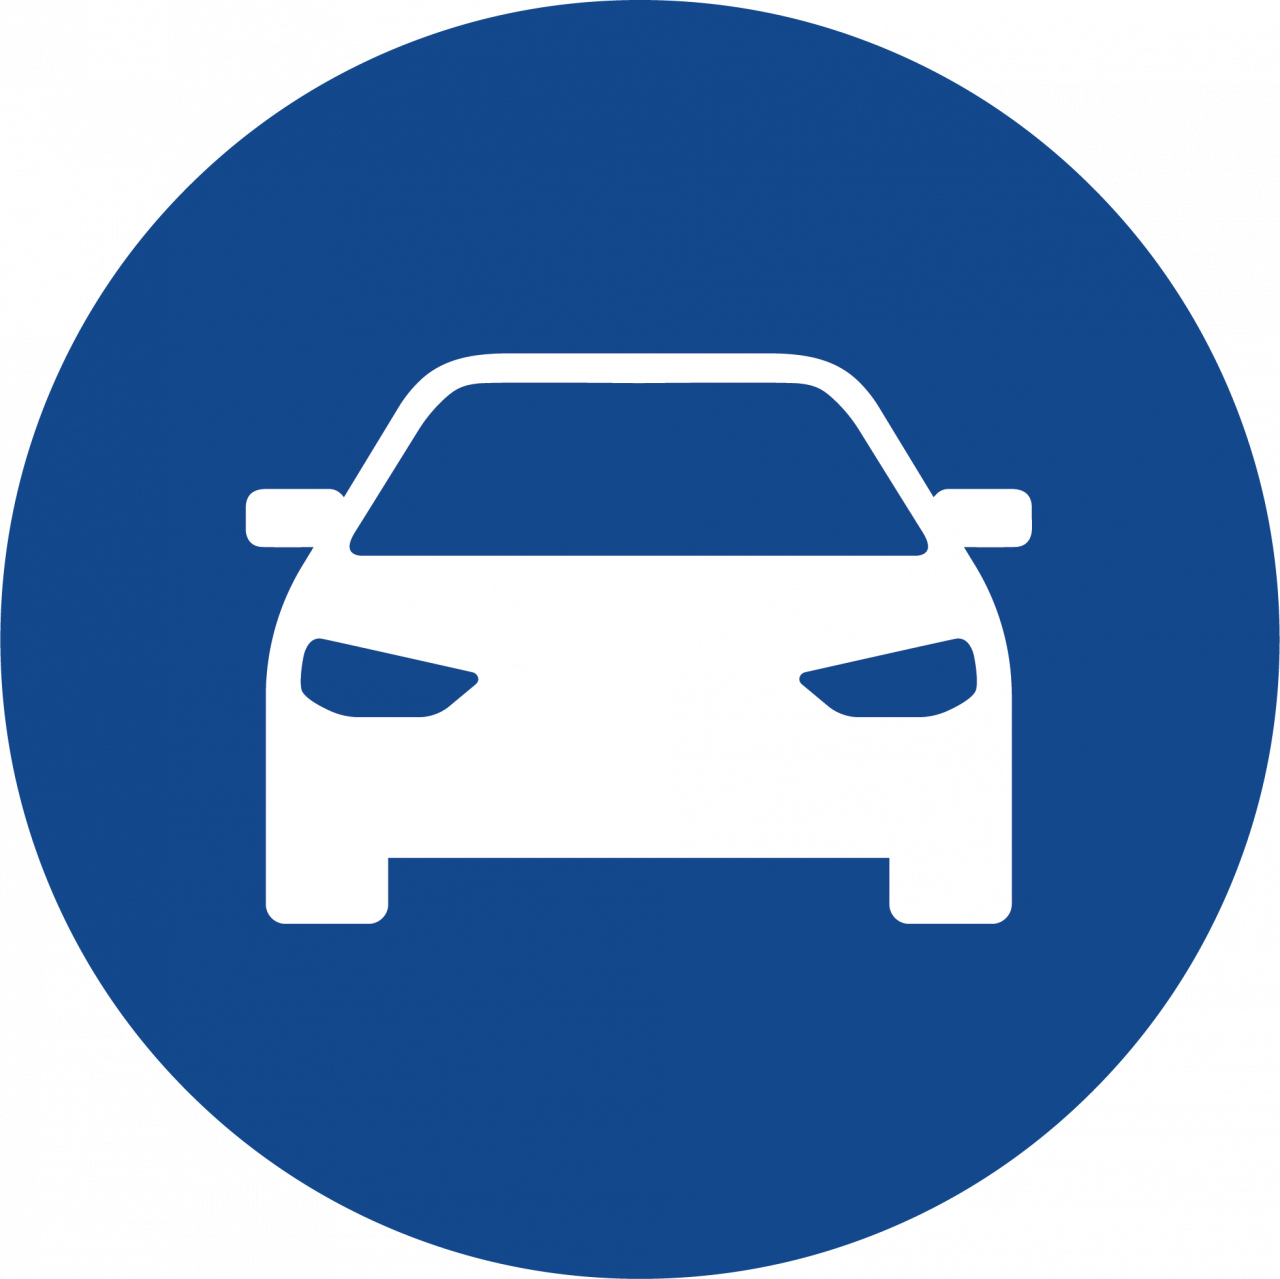 Blue circle with white car icon centered inside